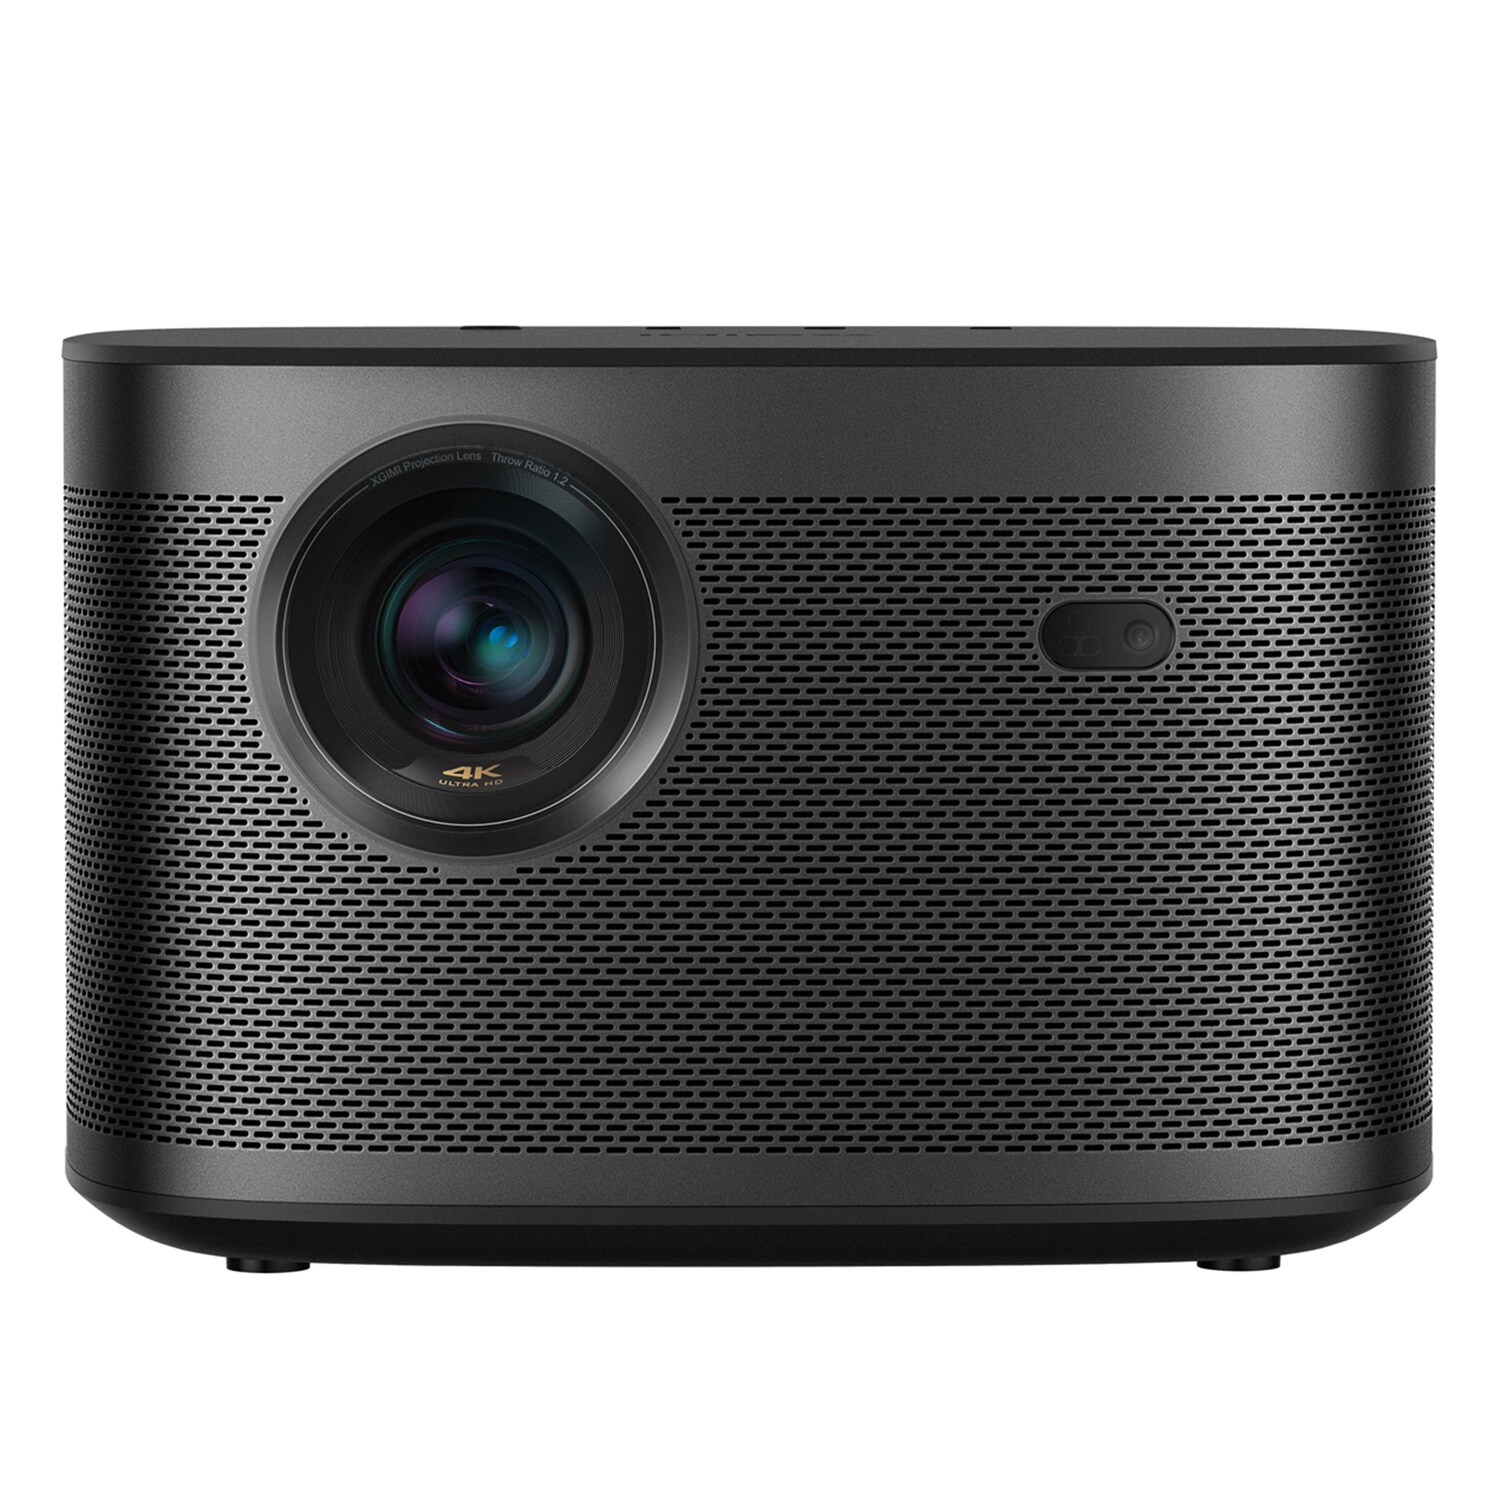 XGIMI HORIZON Pro 4K Smart Home Theater Projector with Voice 